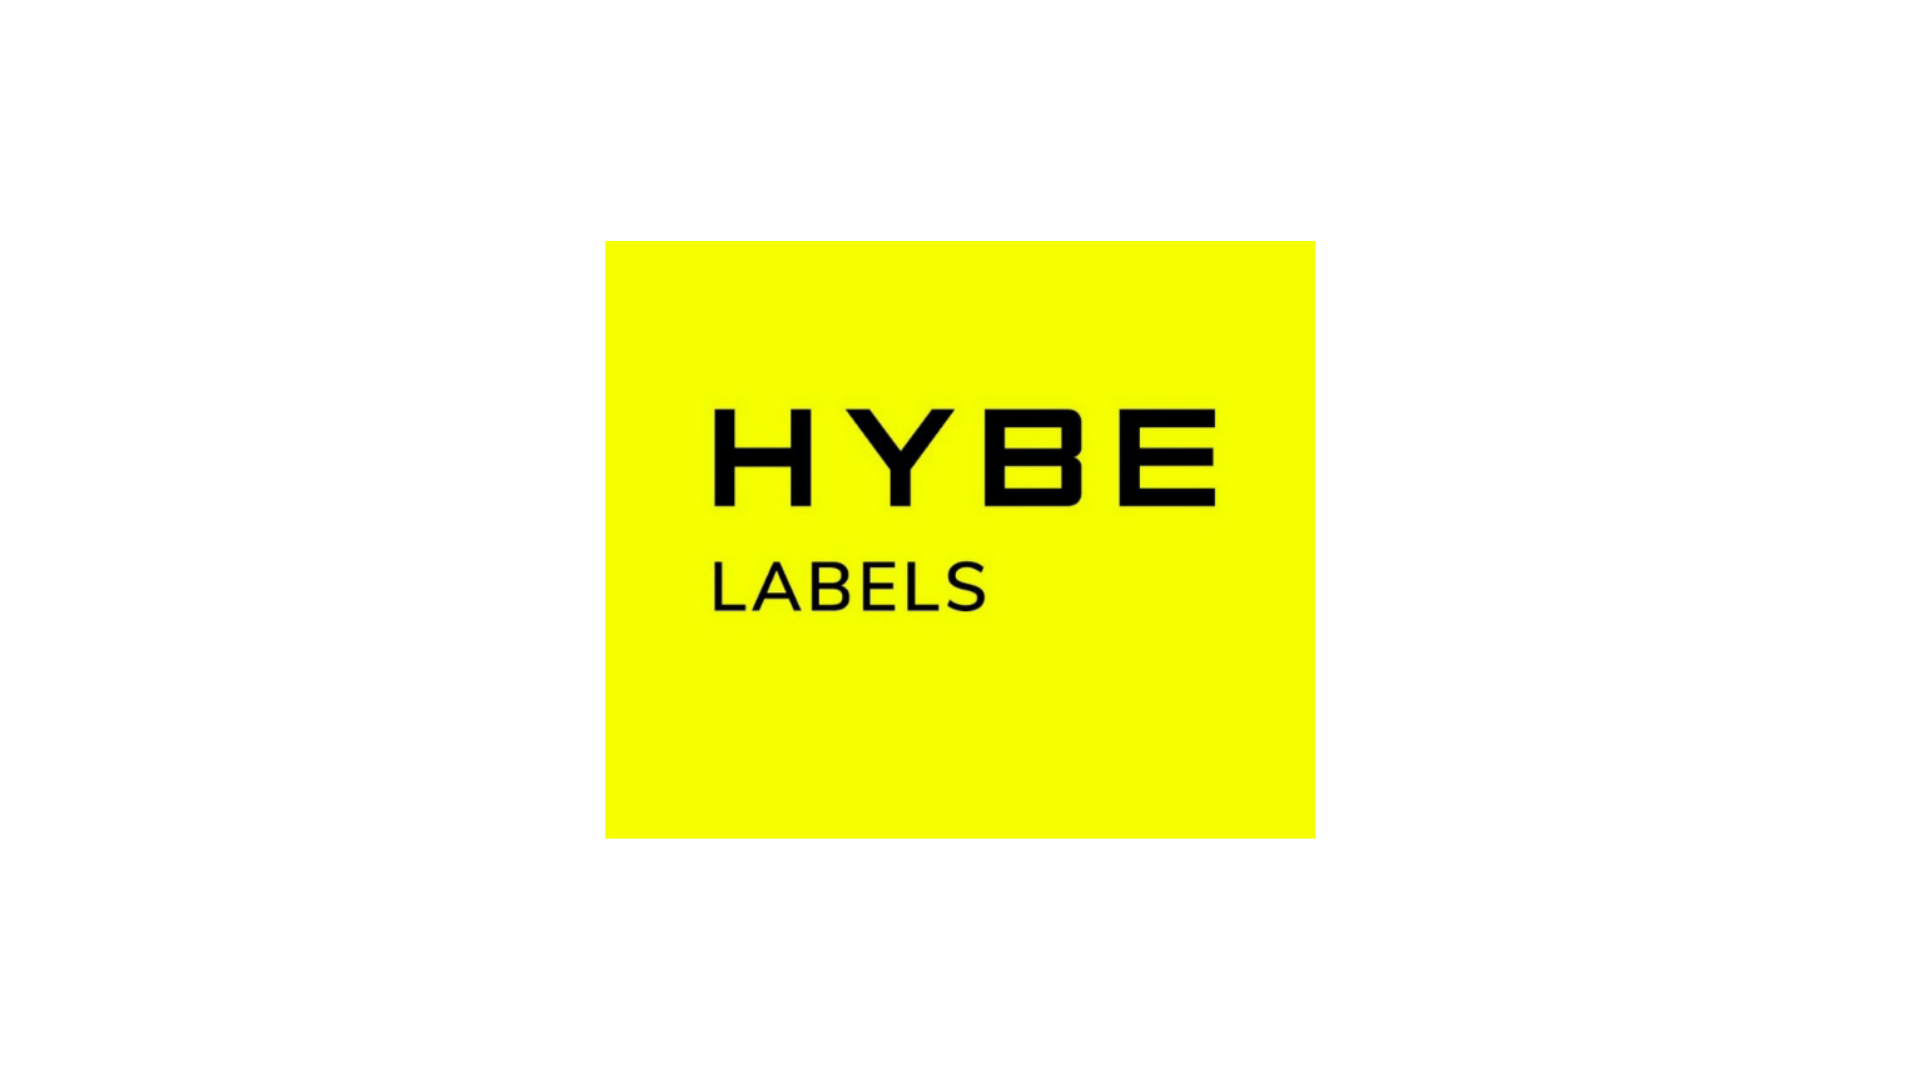 HYBE LABELS